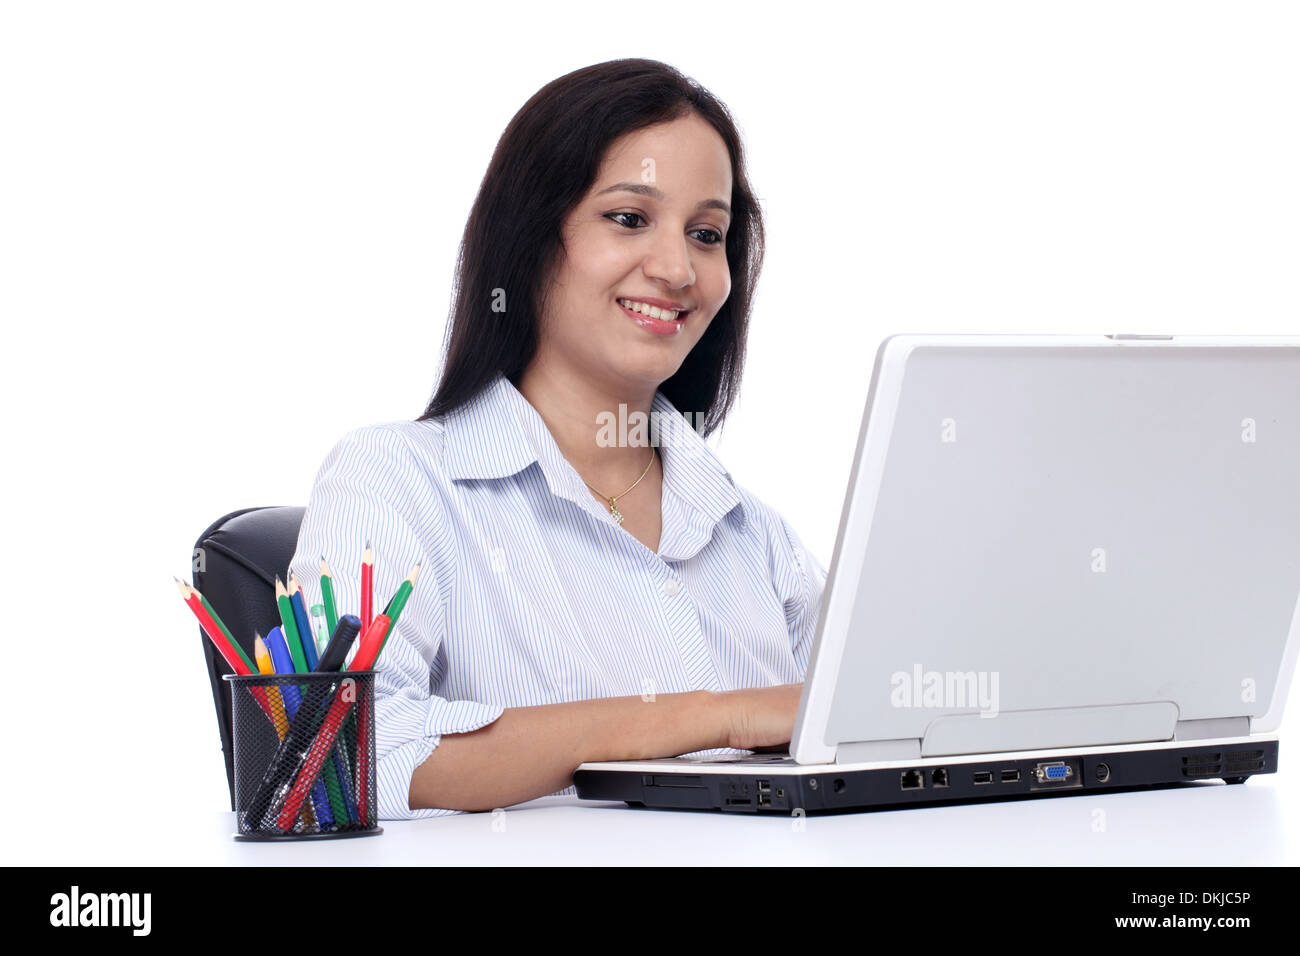 Smiling young business woman working with laptop against white Stock Photo